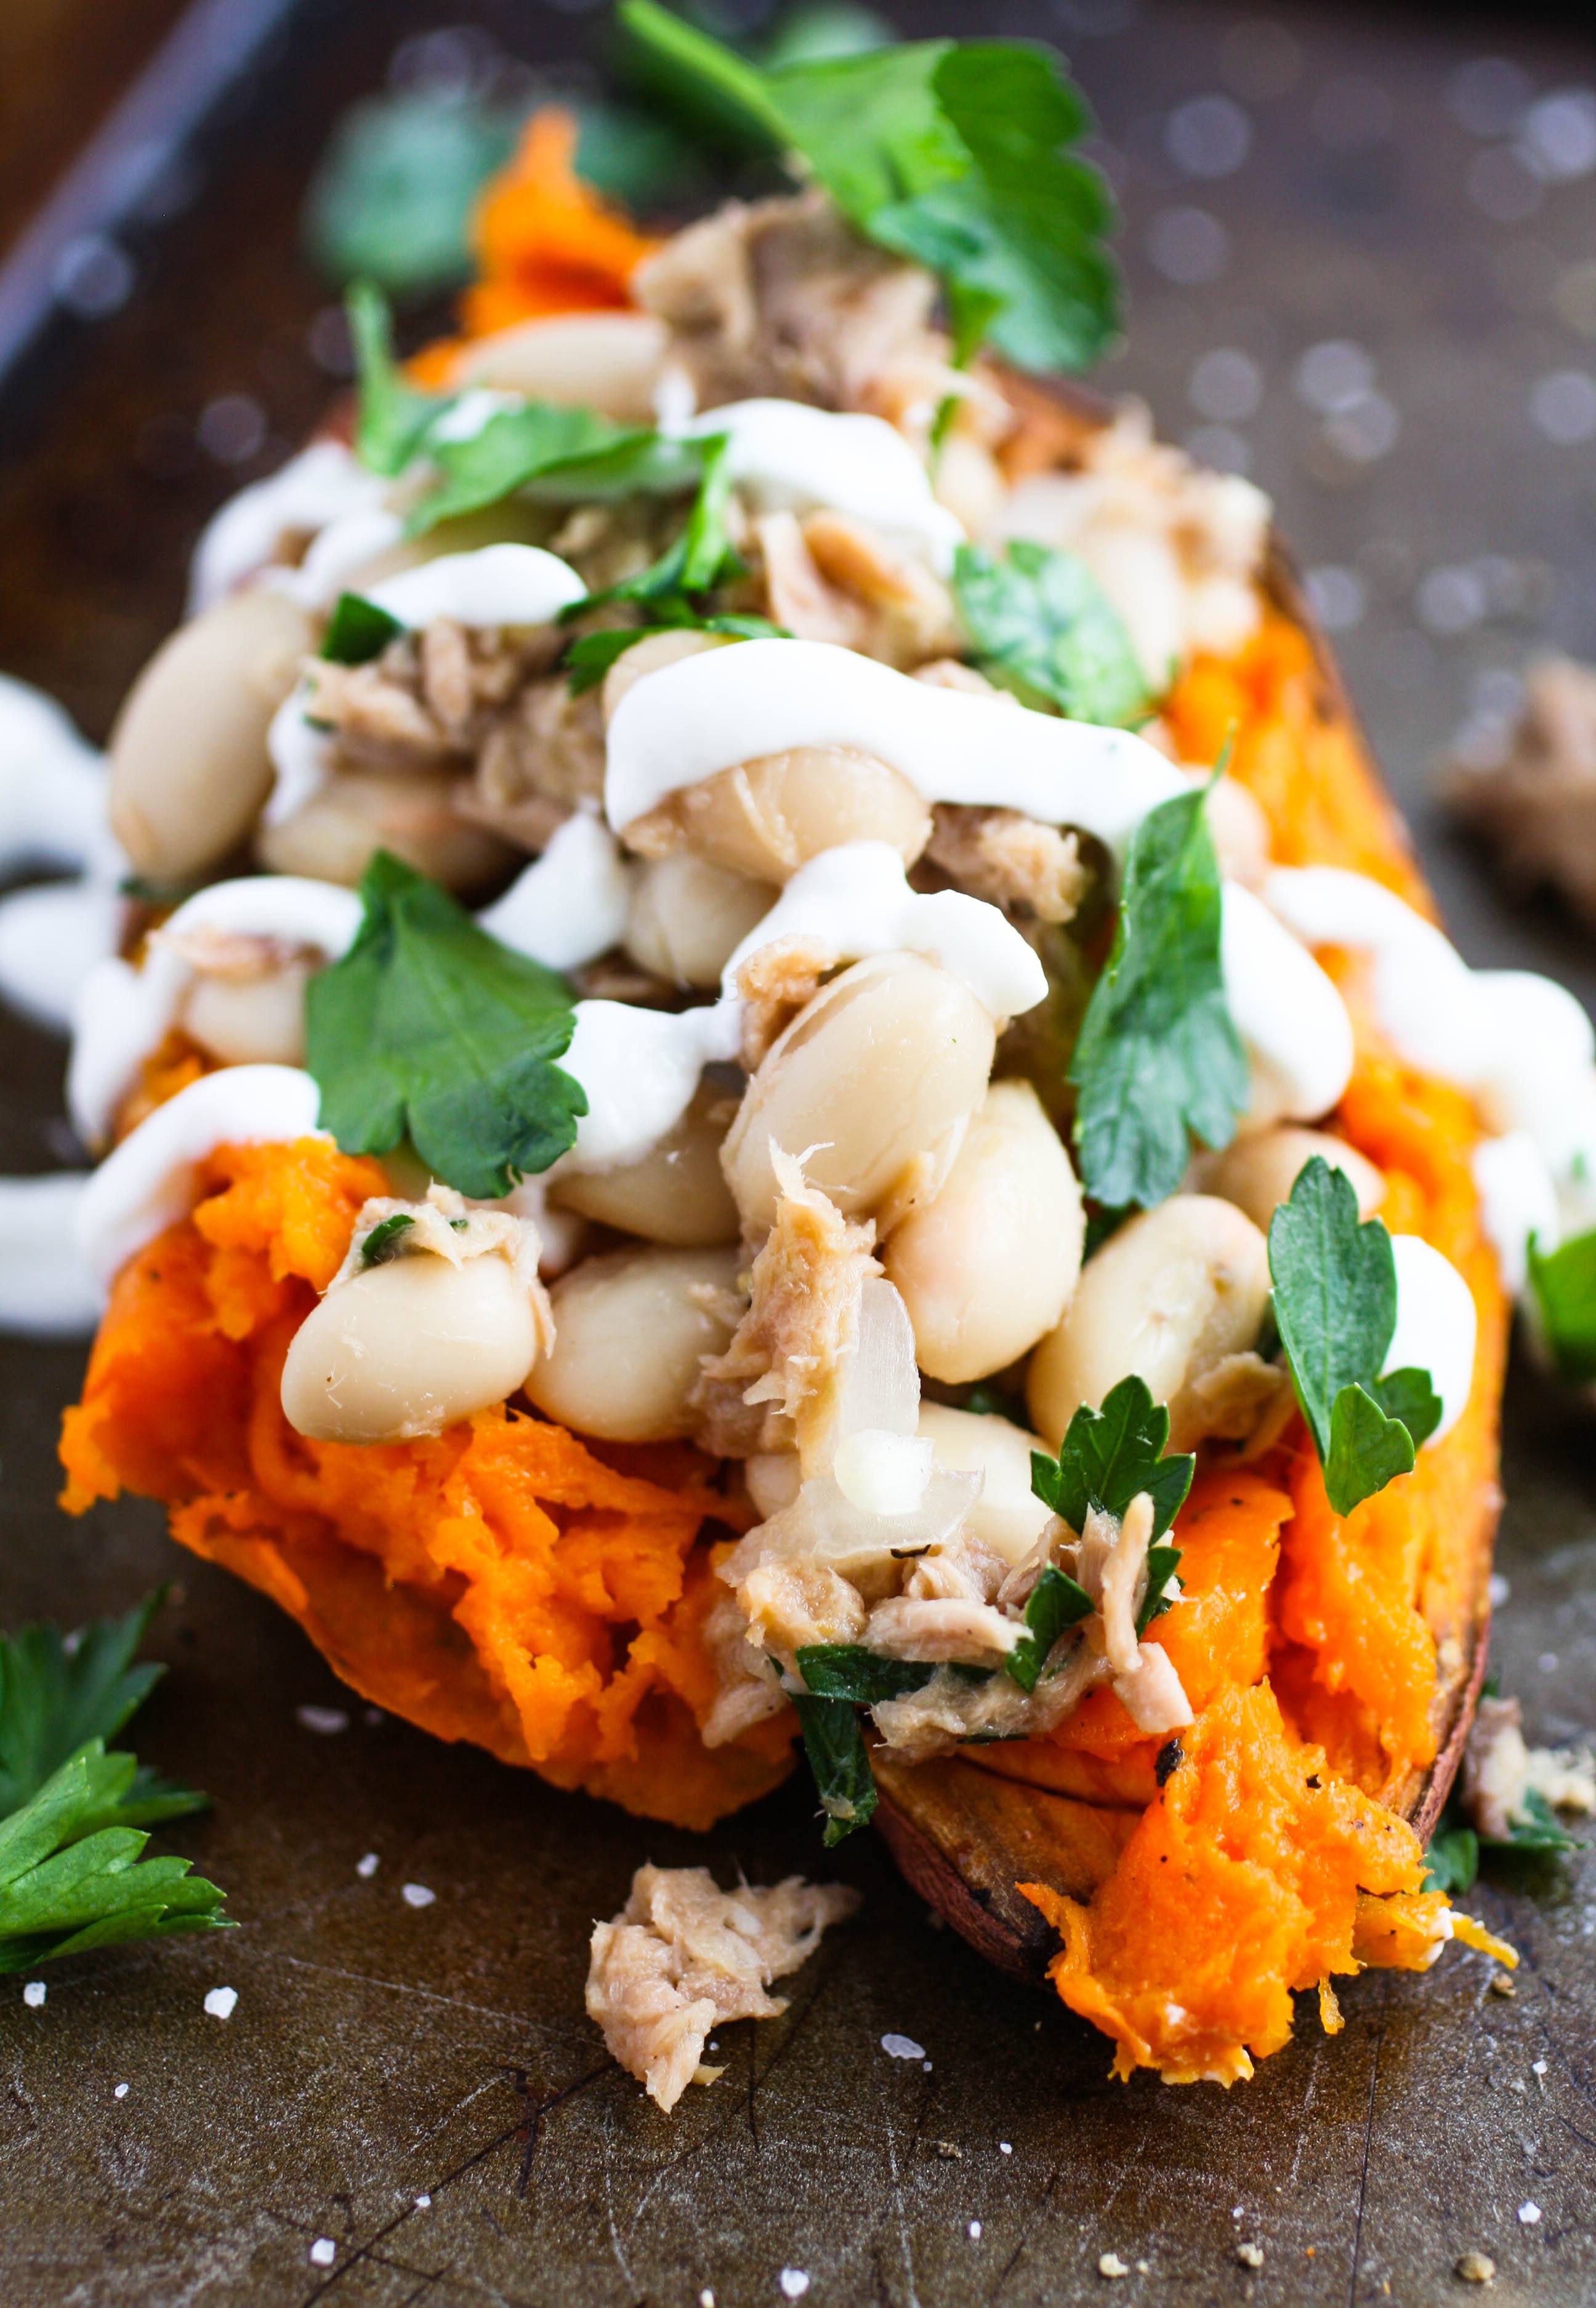 Stuffed Sweet Potatoes with Tuna and Beans make a tasty, simple dish. Stuffed Sweet Potatoes with Tuna and Beans are perfect for your next meatless meal.